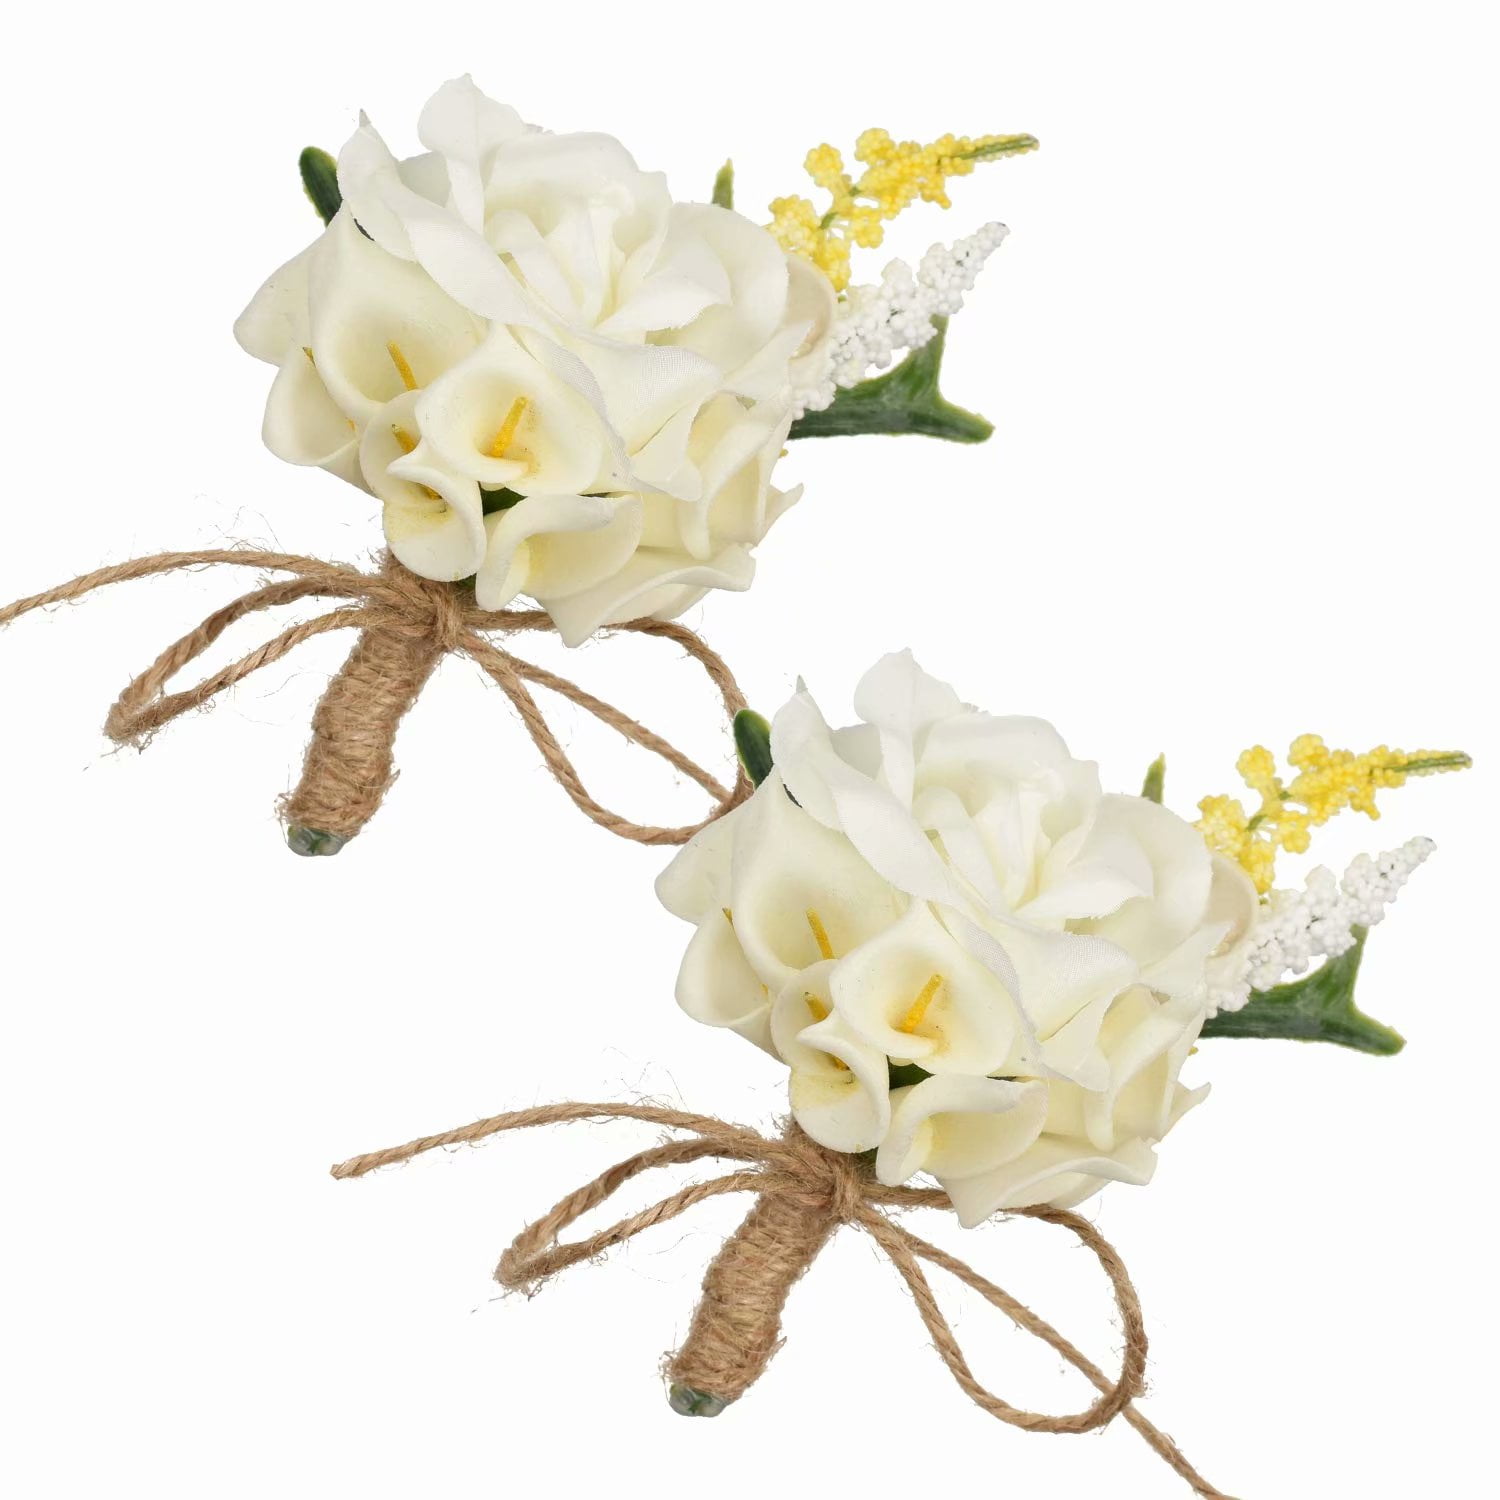 Boutonnieres White Flower Corsage Buttonhole Flowers Bridal Accessories Groom Wedding Flowers Boutonnieres Flower Corsage Flowers with Pin Bridal Groom Wedding Flowers 2pc